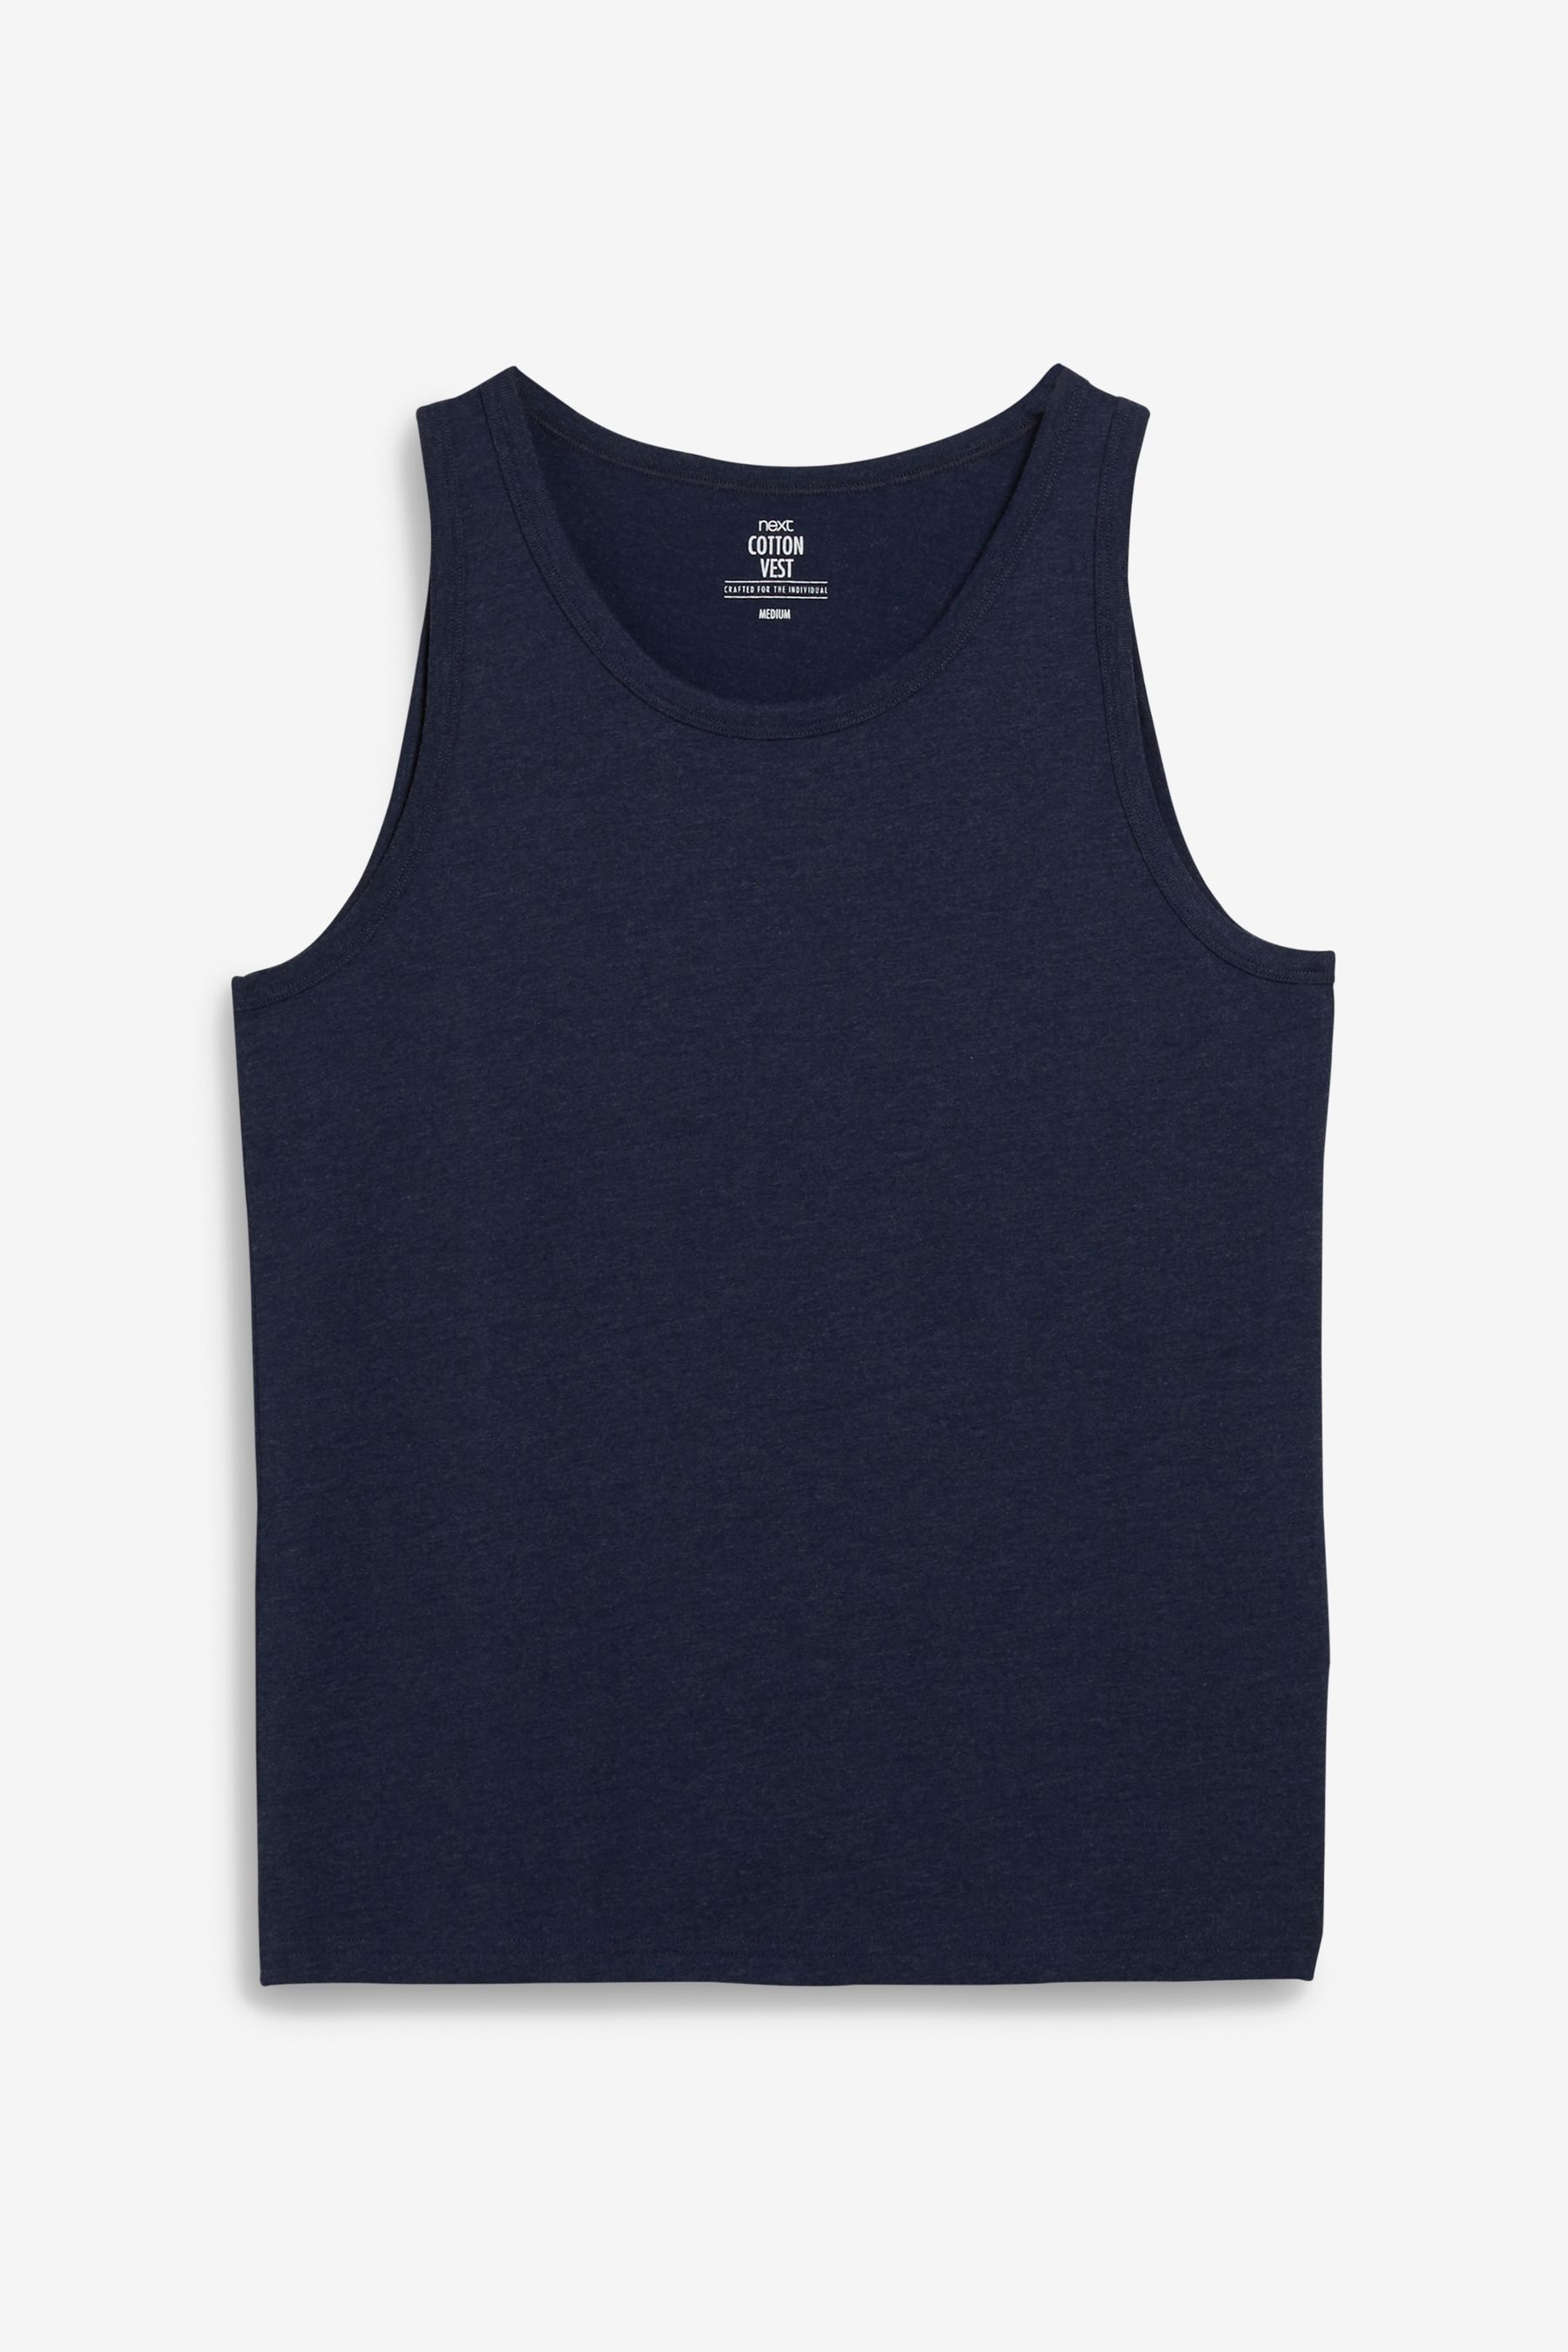 Buy Navy Blue/Blue/White/Grey Marl Vests 5 Pack from the Next UK online ...